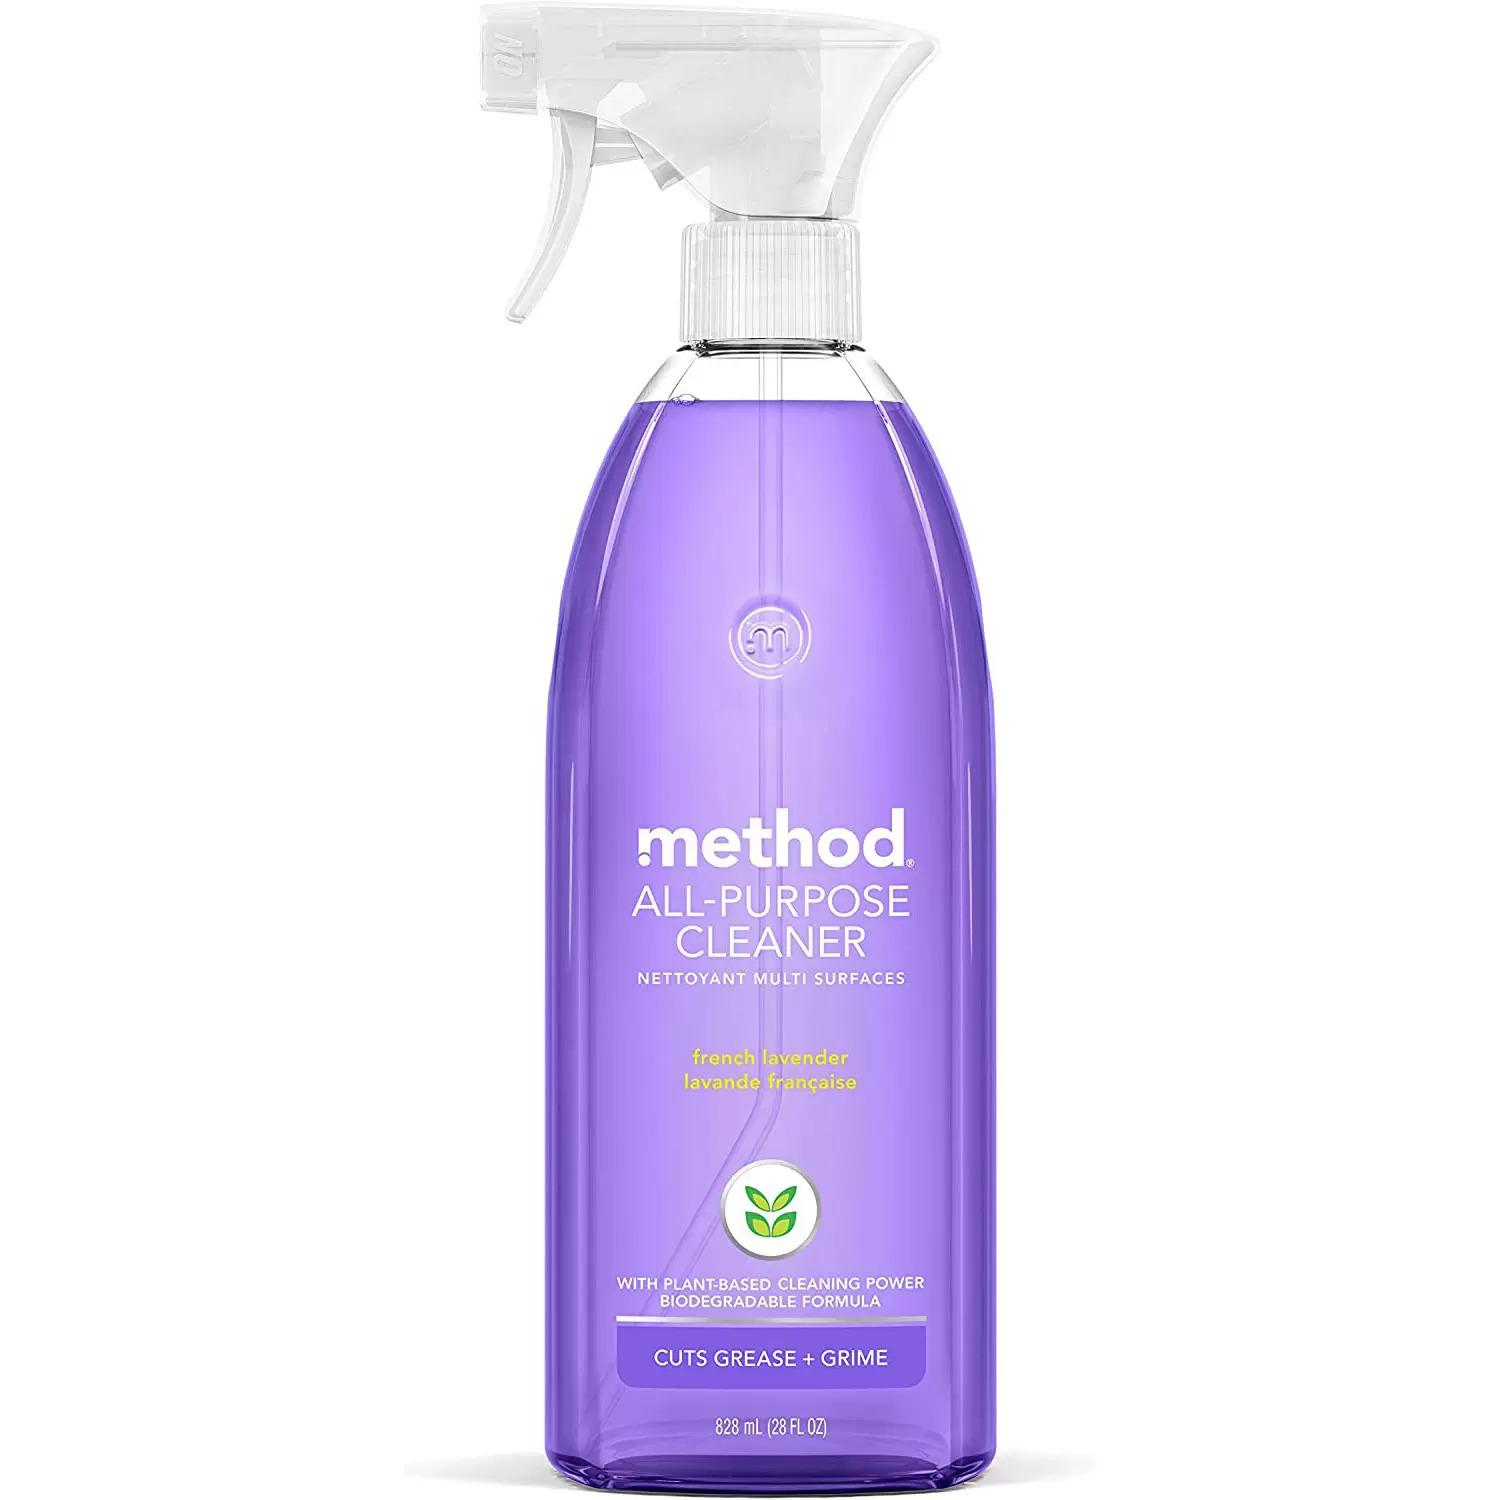 Method All-Purpose Cleaner Spray French Lavender for $2.52